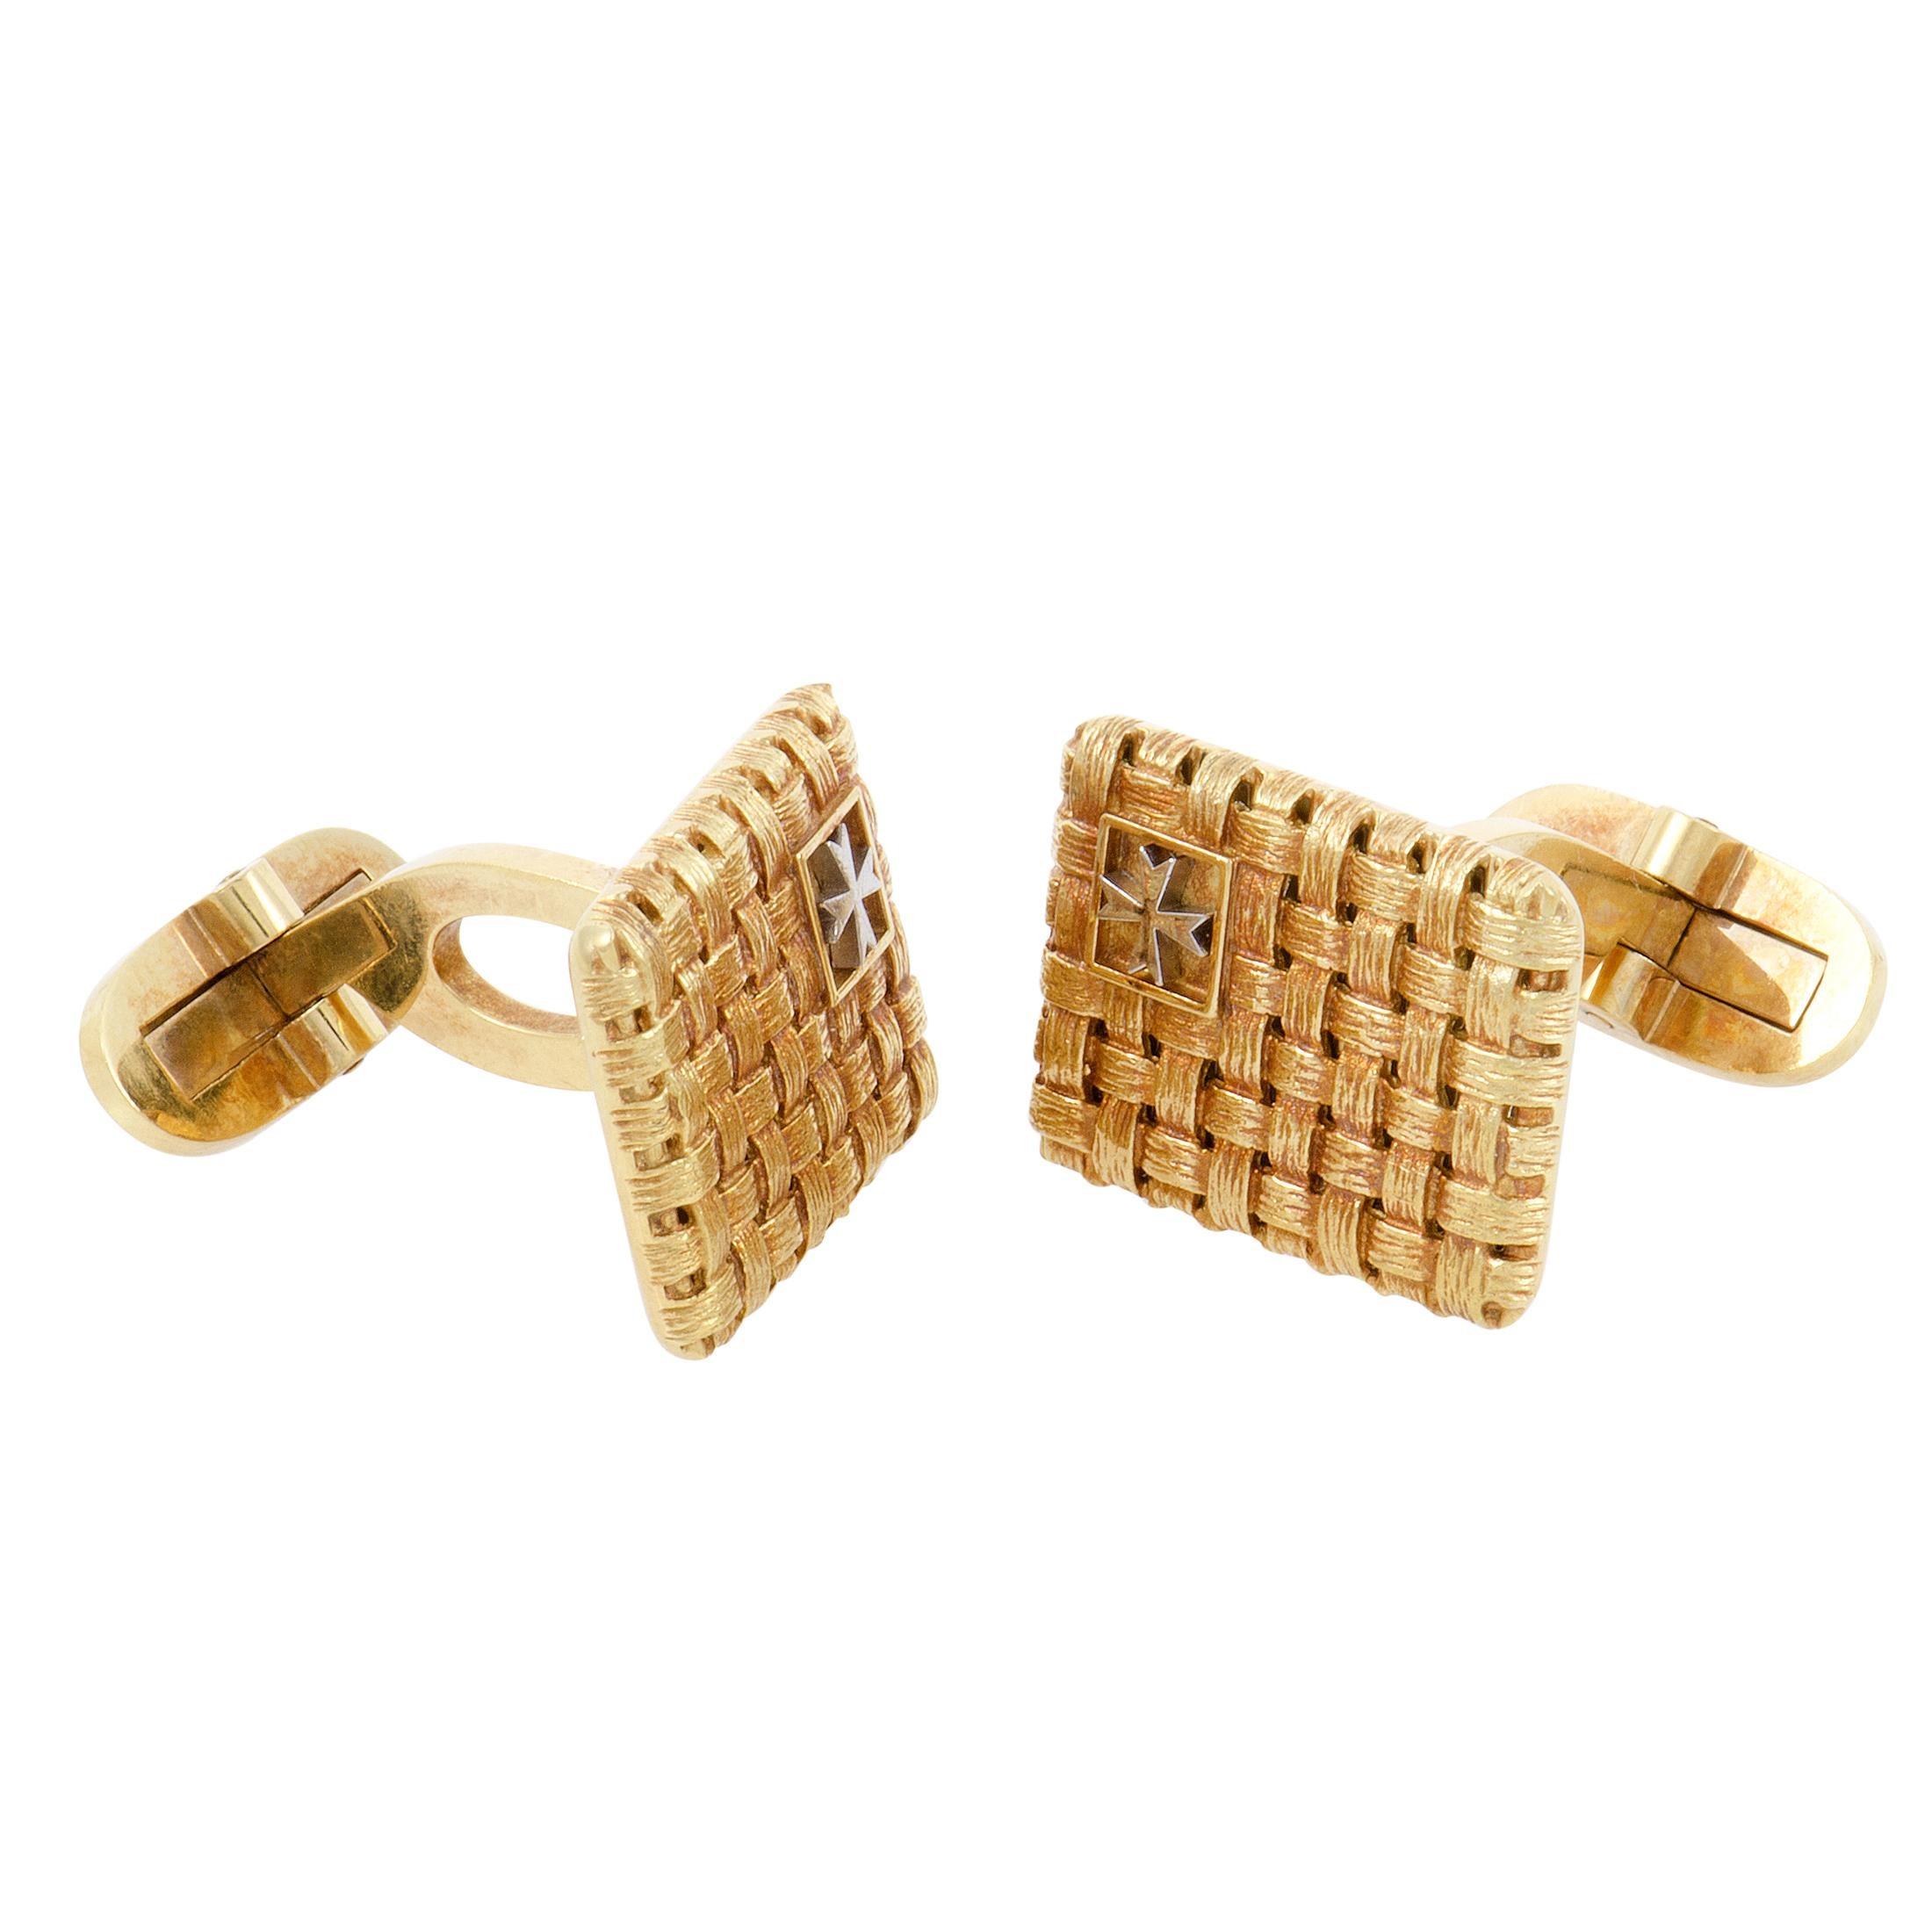 Intriguing weaved pattern is intricately crafted from prestigious 18K yellow gold, showcasing the brand's exquisite expertise while their instantly recognizable logo is done in brightly contrasting 18K white gold in these neat cufflinks from